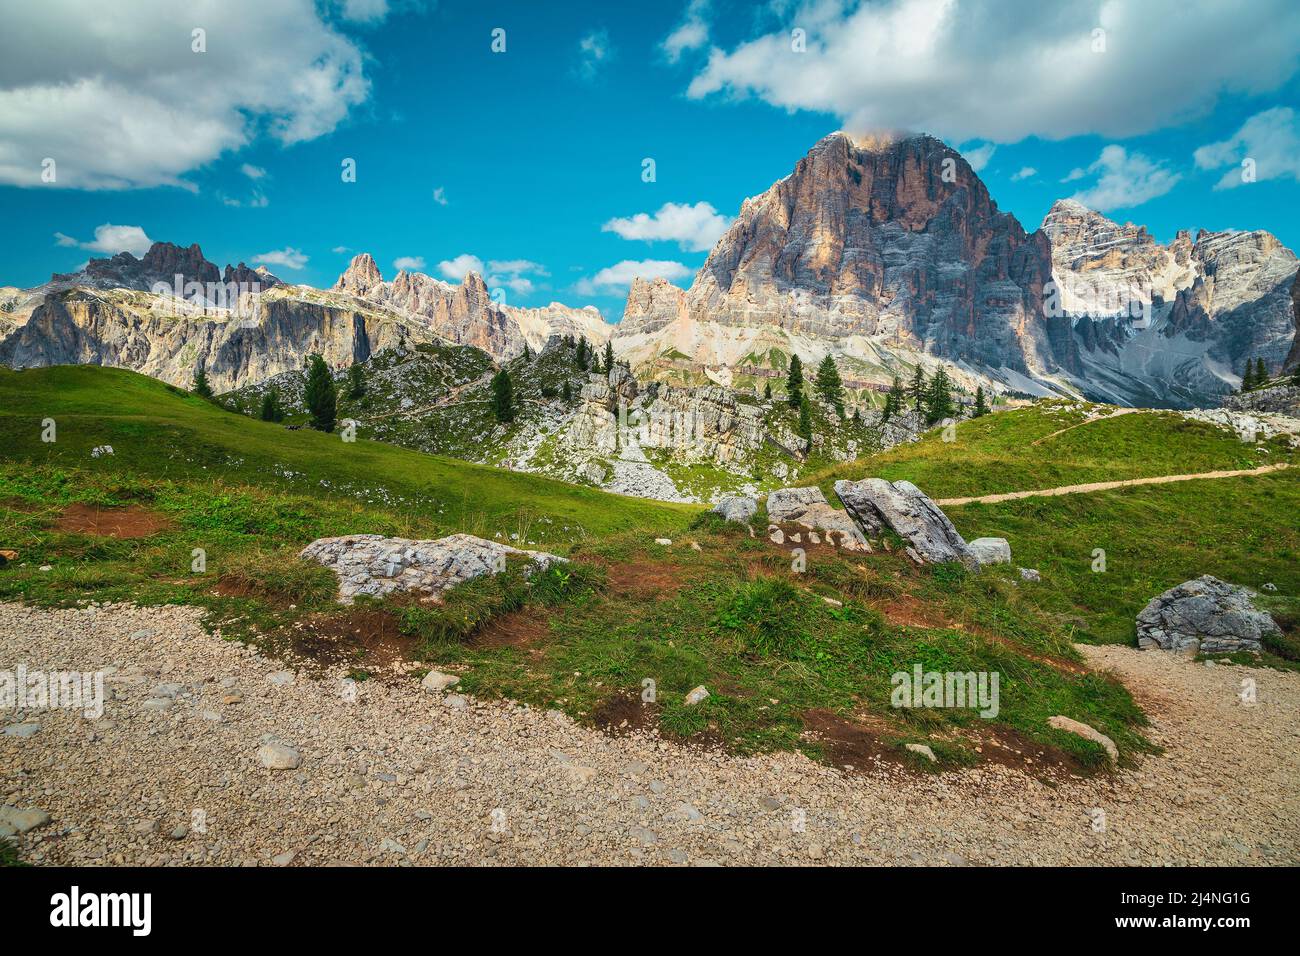 Winding hiking trail on the mountain slope in the Dolomites, Italy, Europe Stock Photo